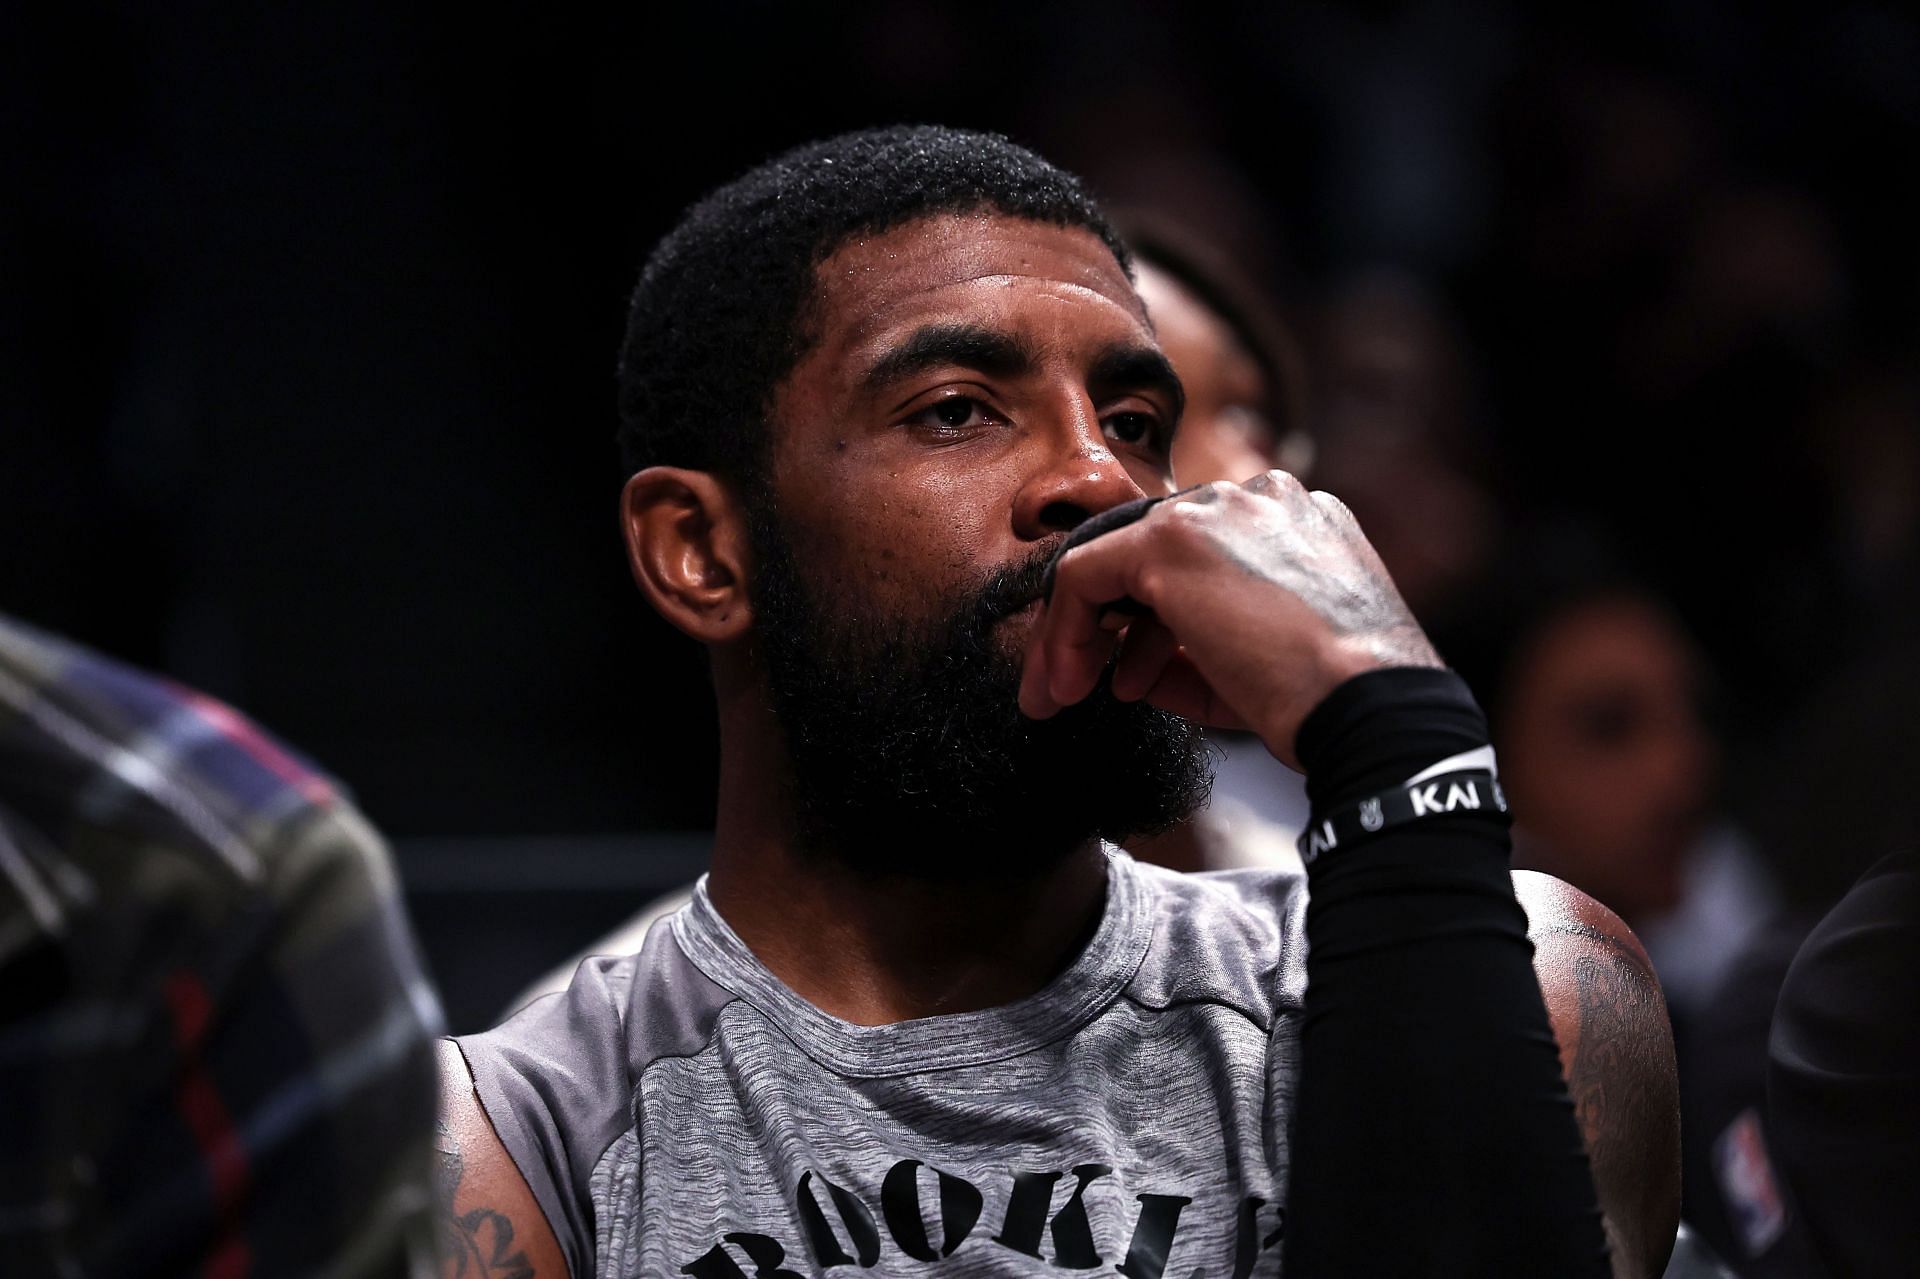 Former NBA player believes Kyrie Irving should have publicly apologized for his recent controversy: “Those voices, I believe, are gonna be just as steadfast if not louder”